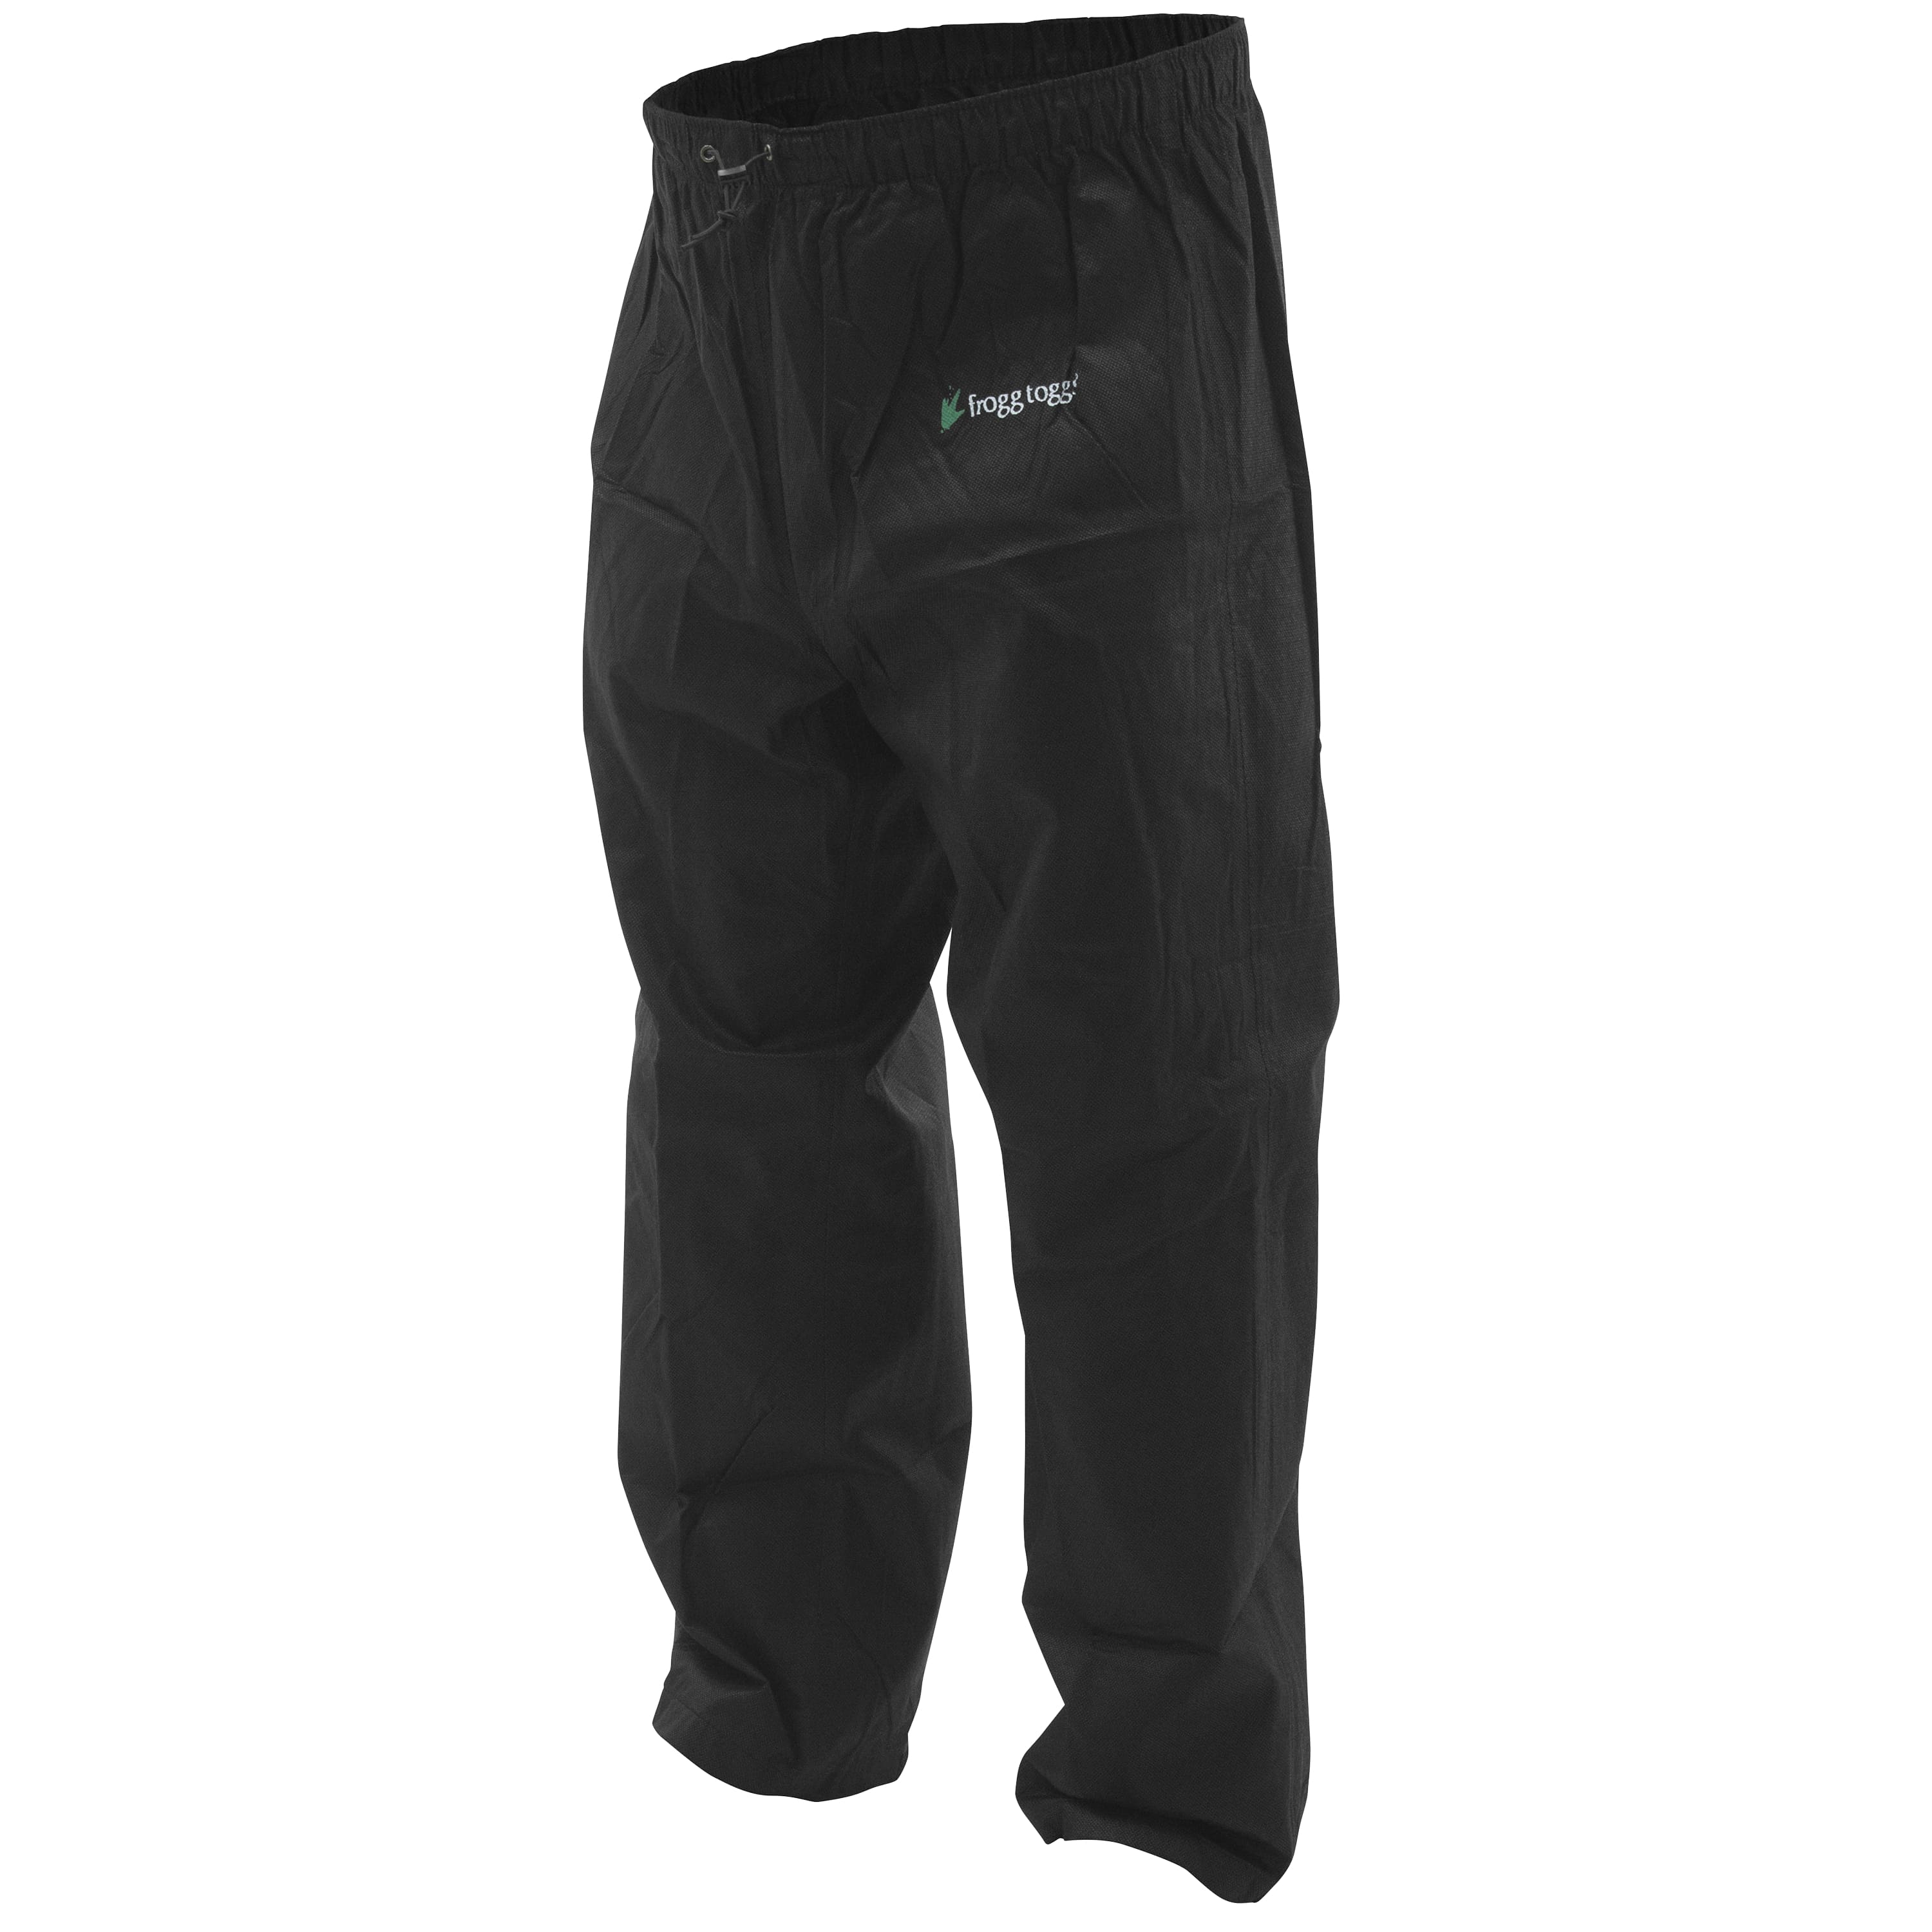 Frogg Toggs Men's Classic Pro Action Pant | Black | Size MD - image 1 of 3